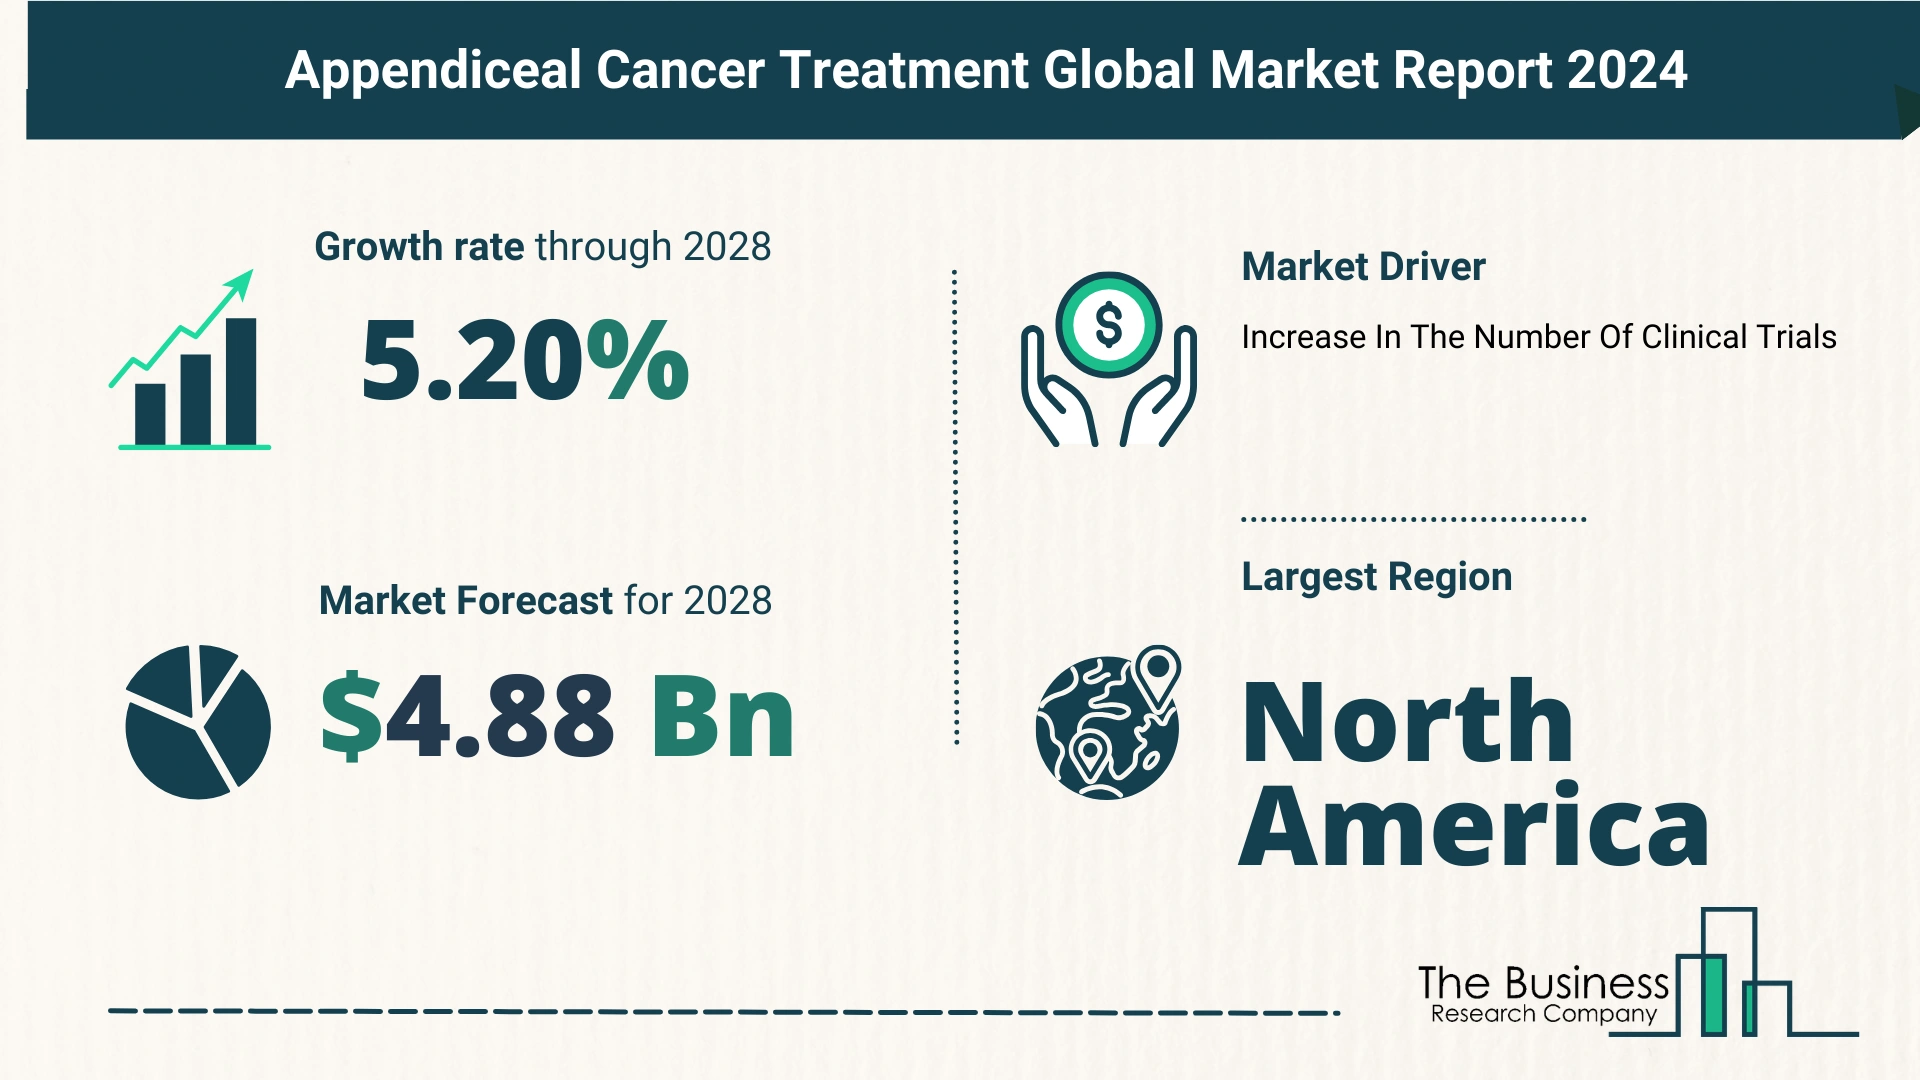 Global Appendiceal Cancer Treatment Market Report 2024 – Top Market Trends And Opportunities